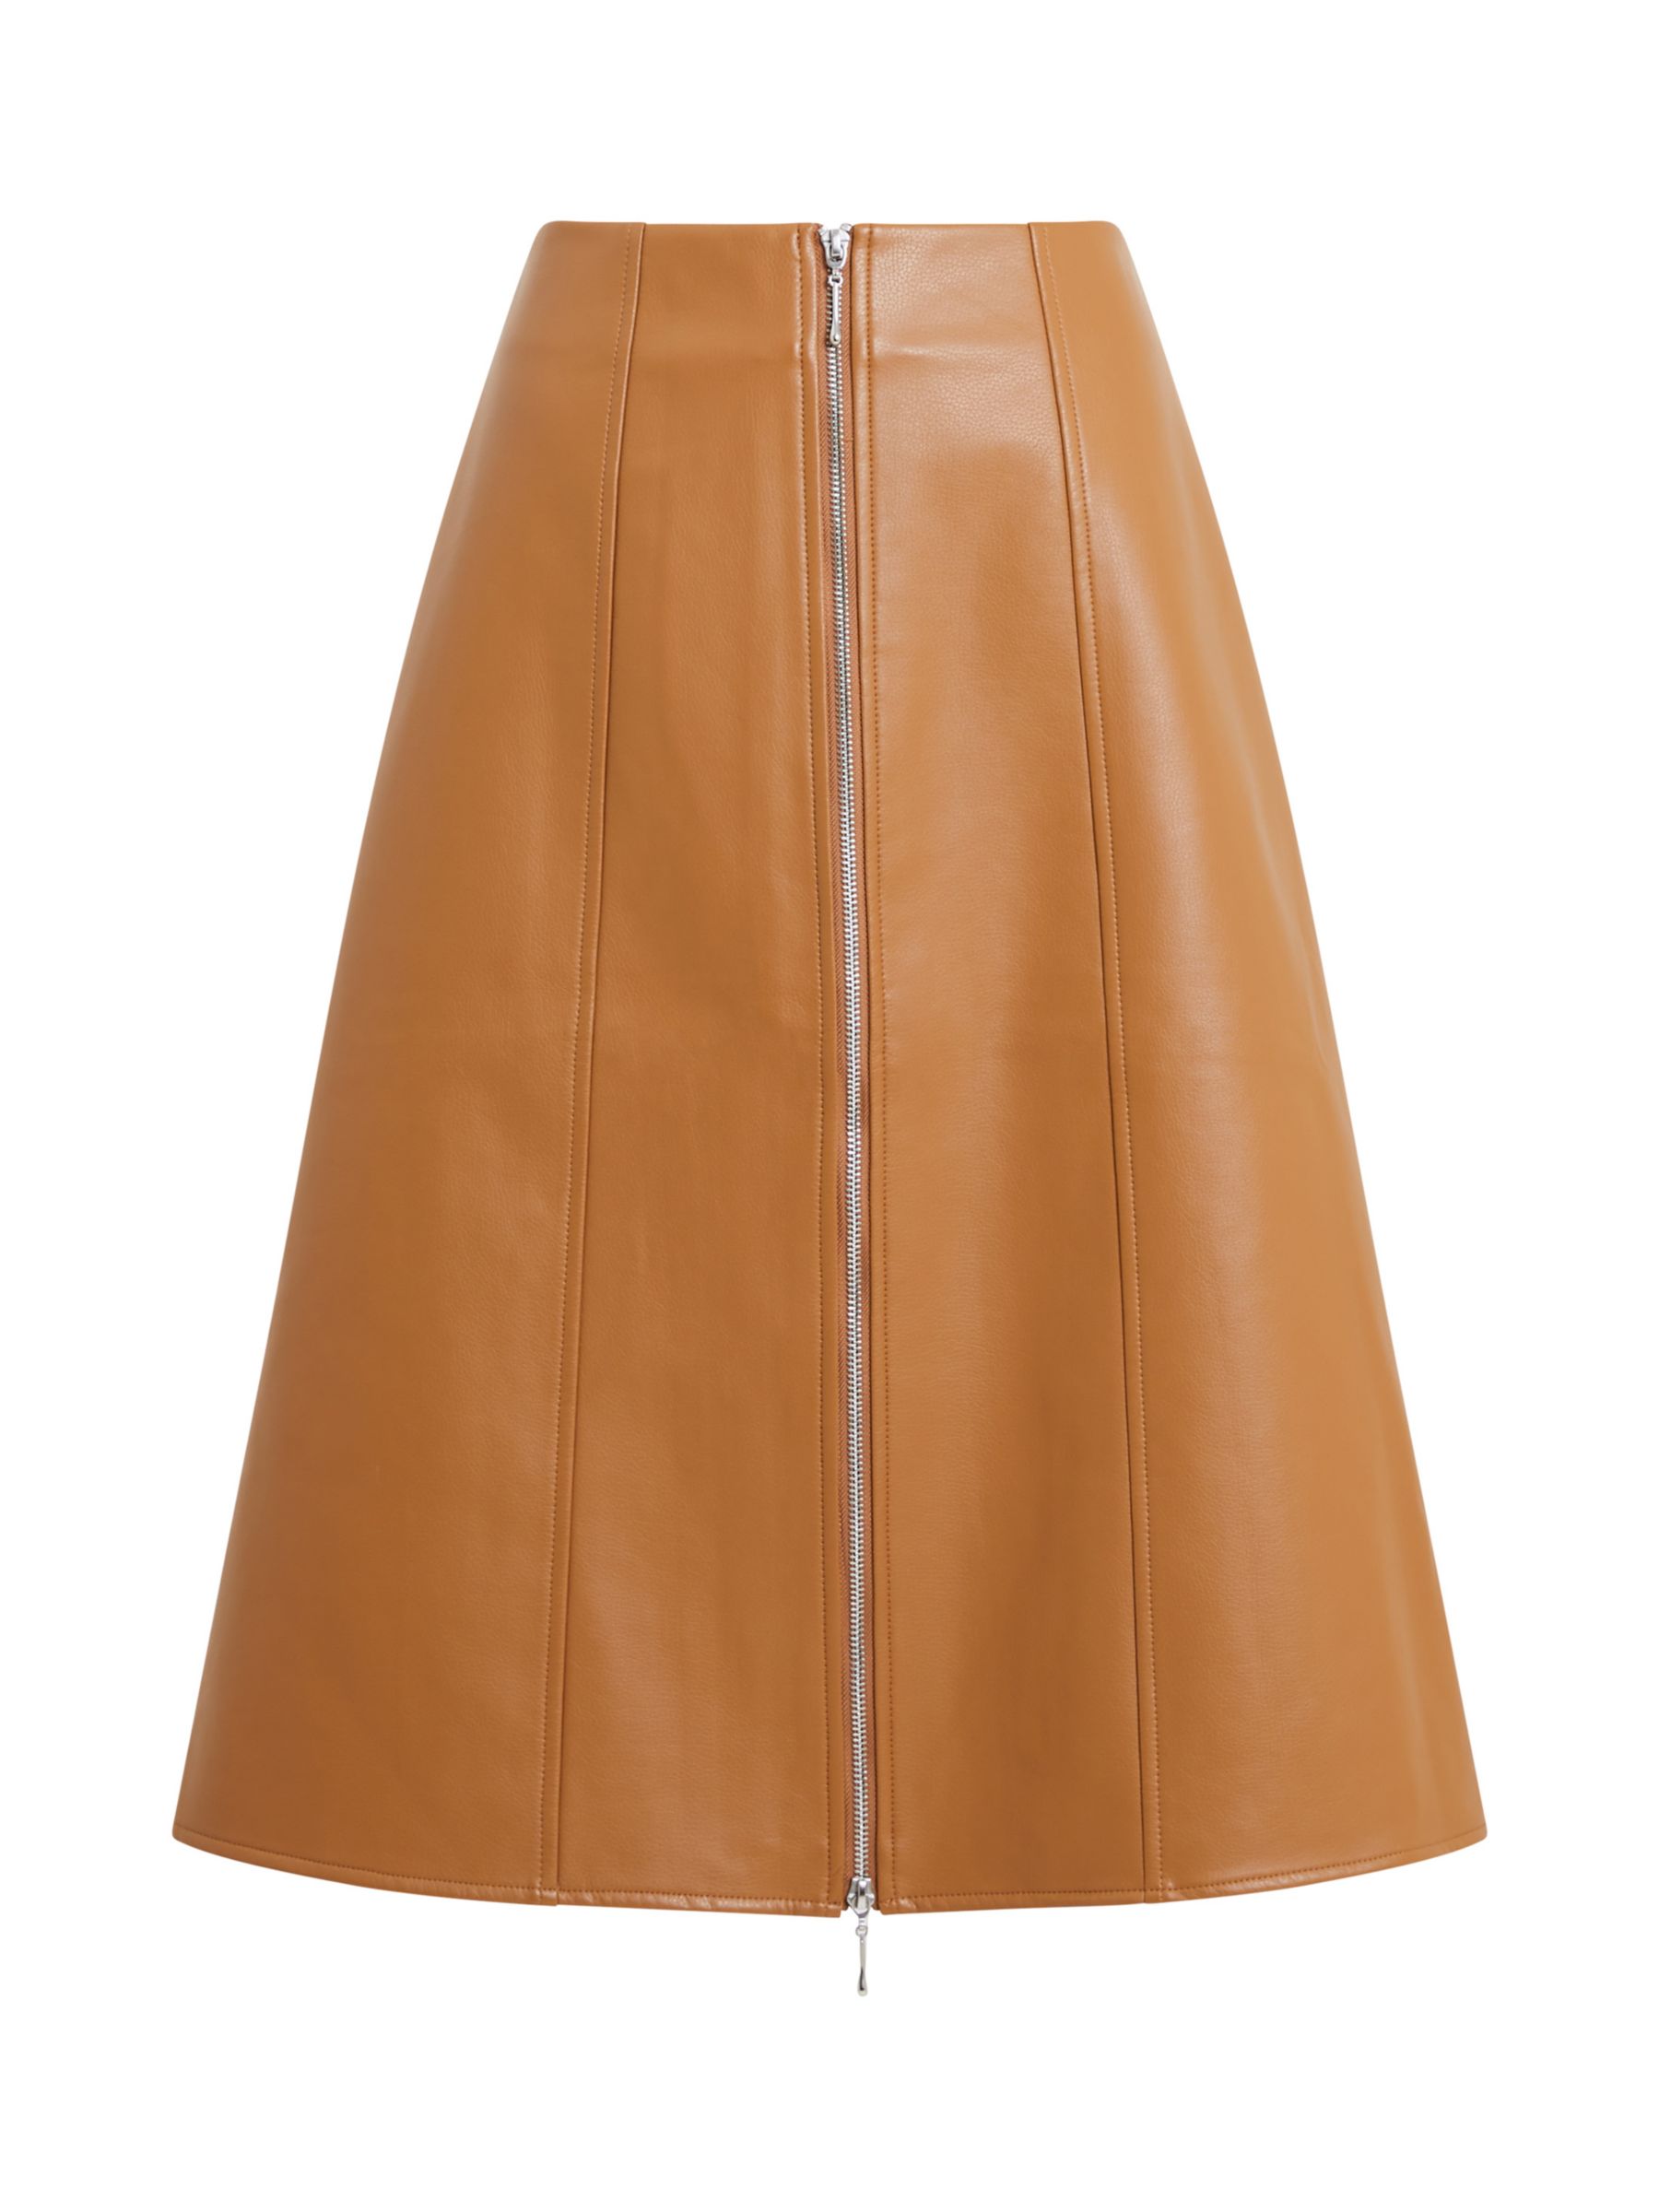 Buy French Connection Claudia PU Knee Length Skirt, Tobacco Brown Online at johnlewis.com